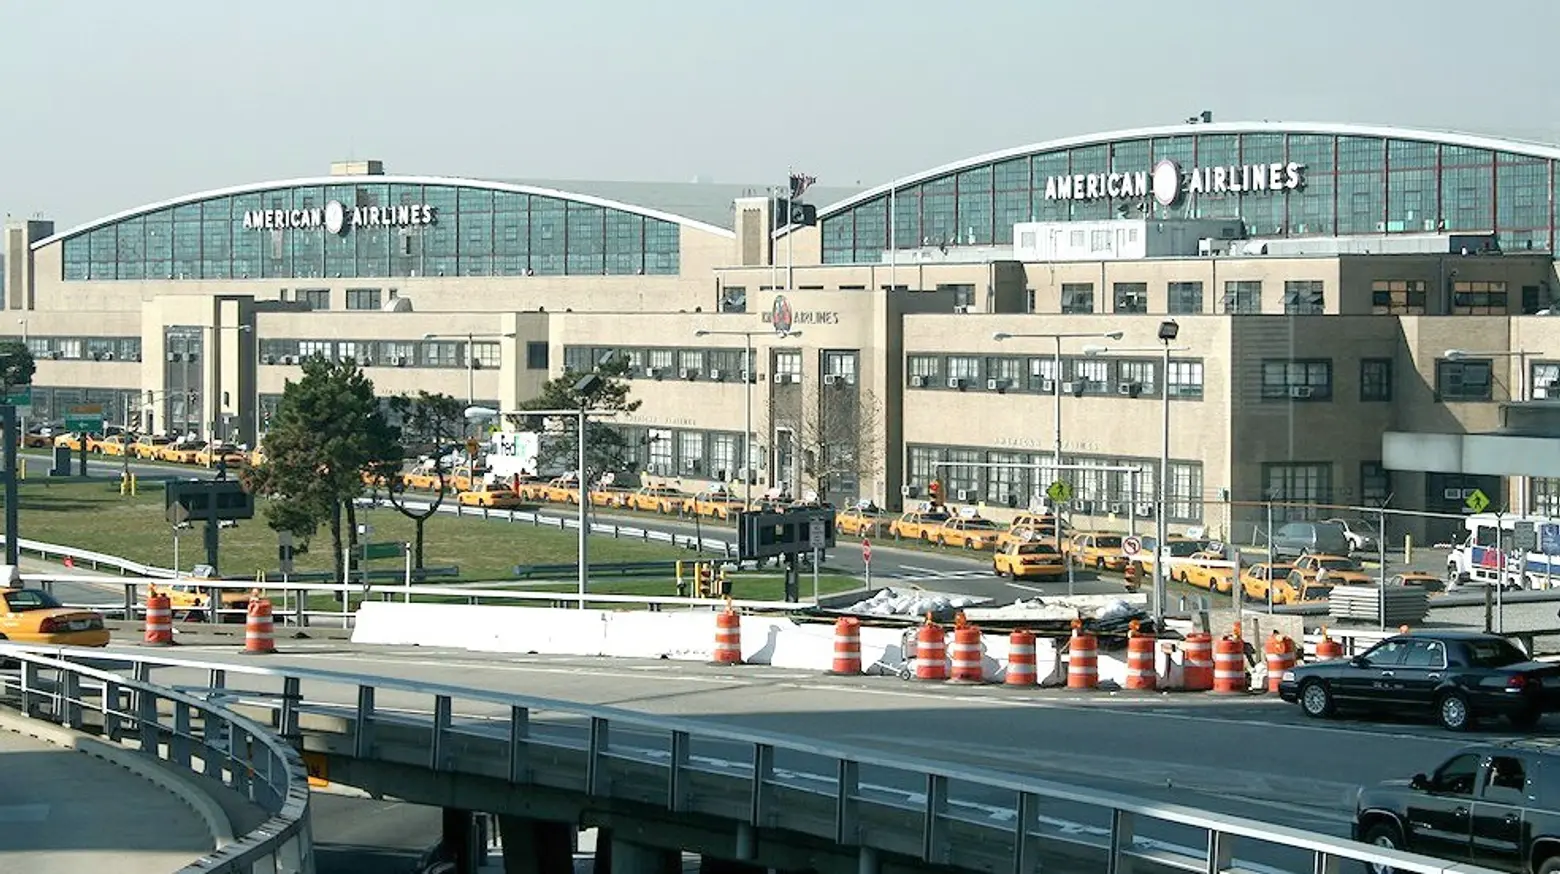 Construction at LaGuardia worsens traffic issues; the architecture of Beyoncé